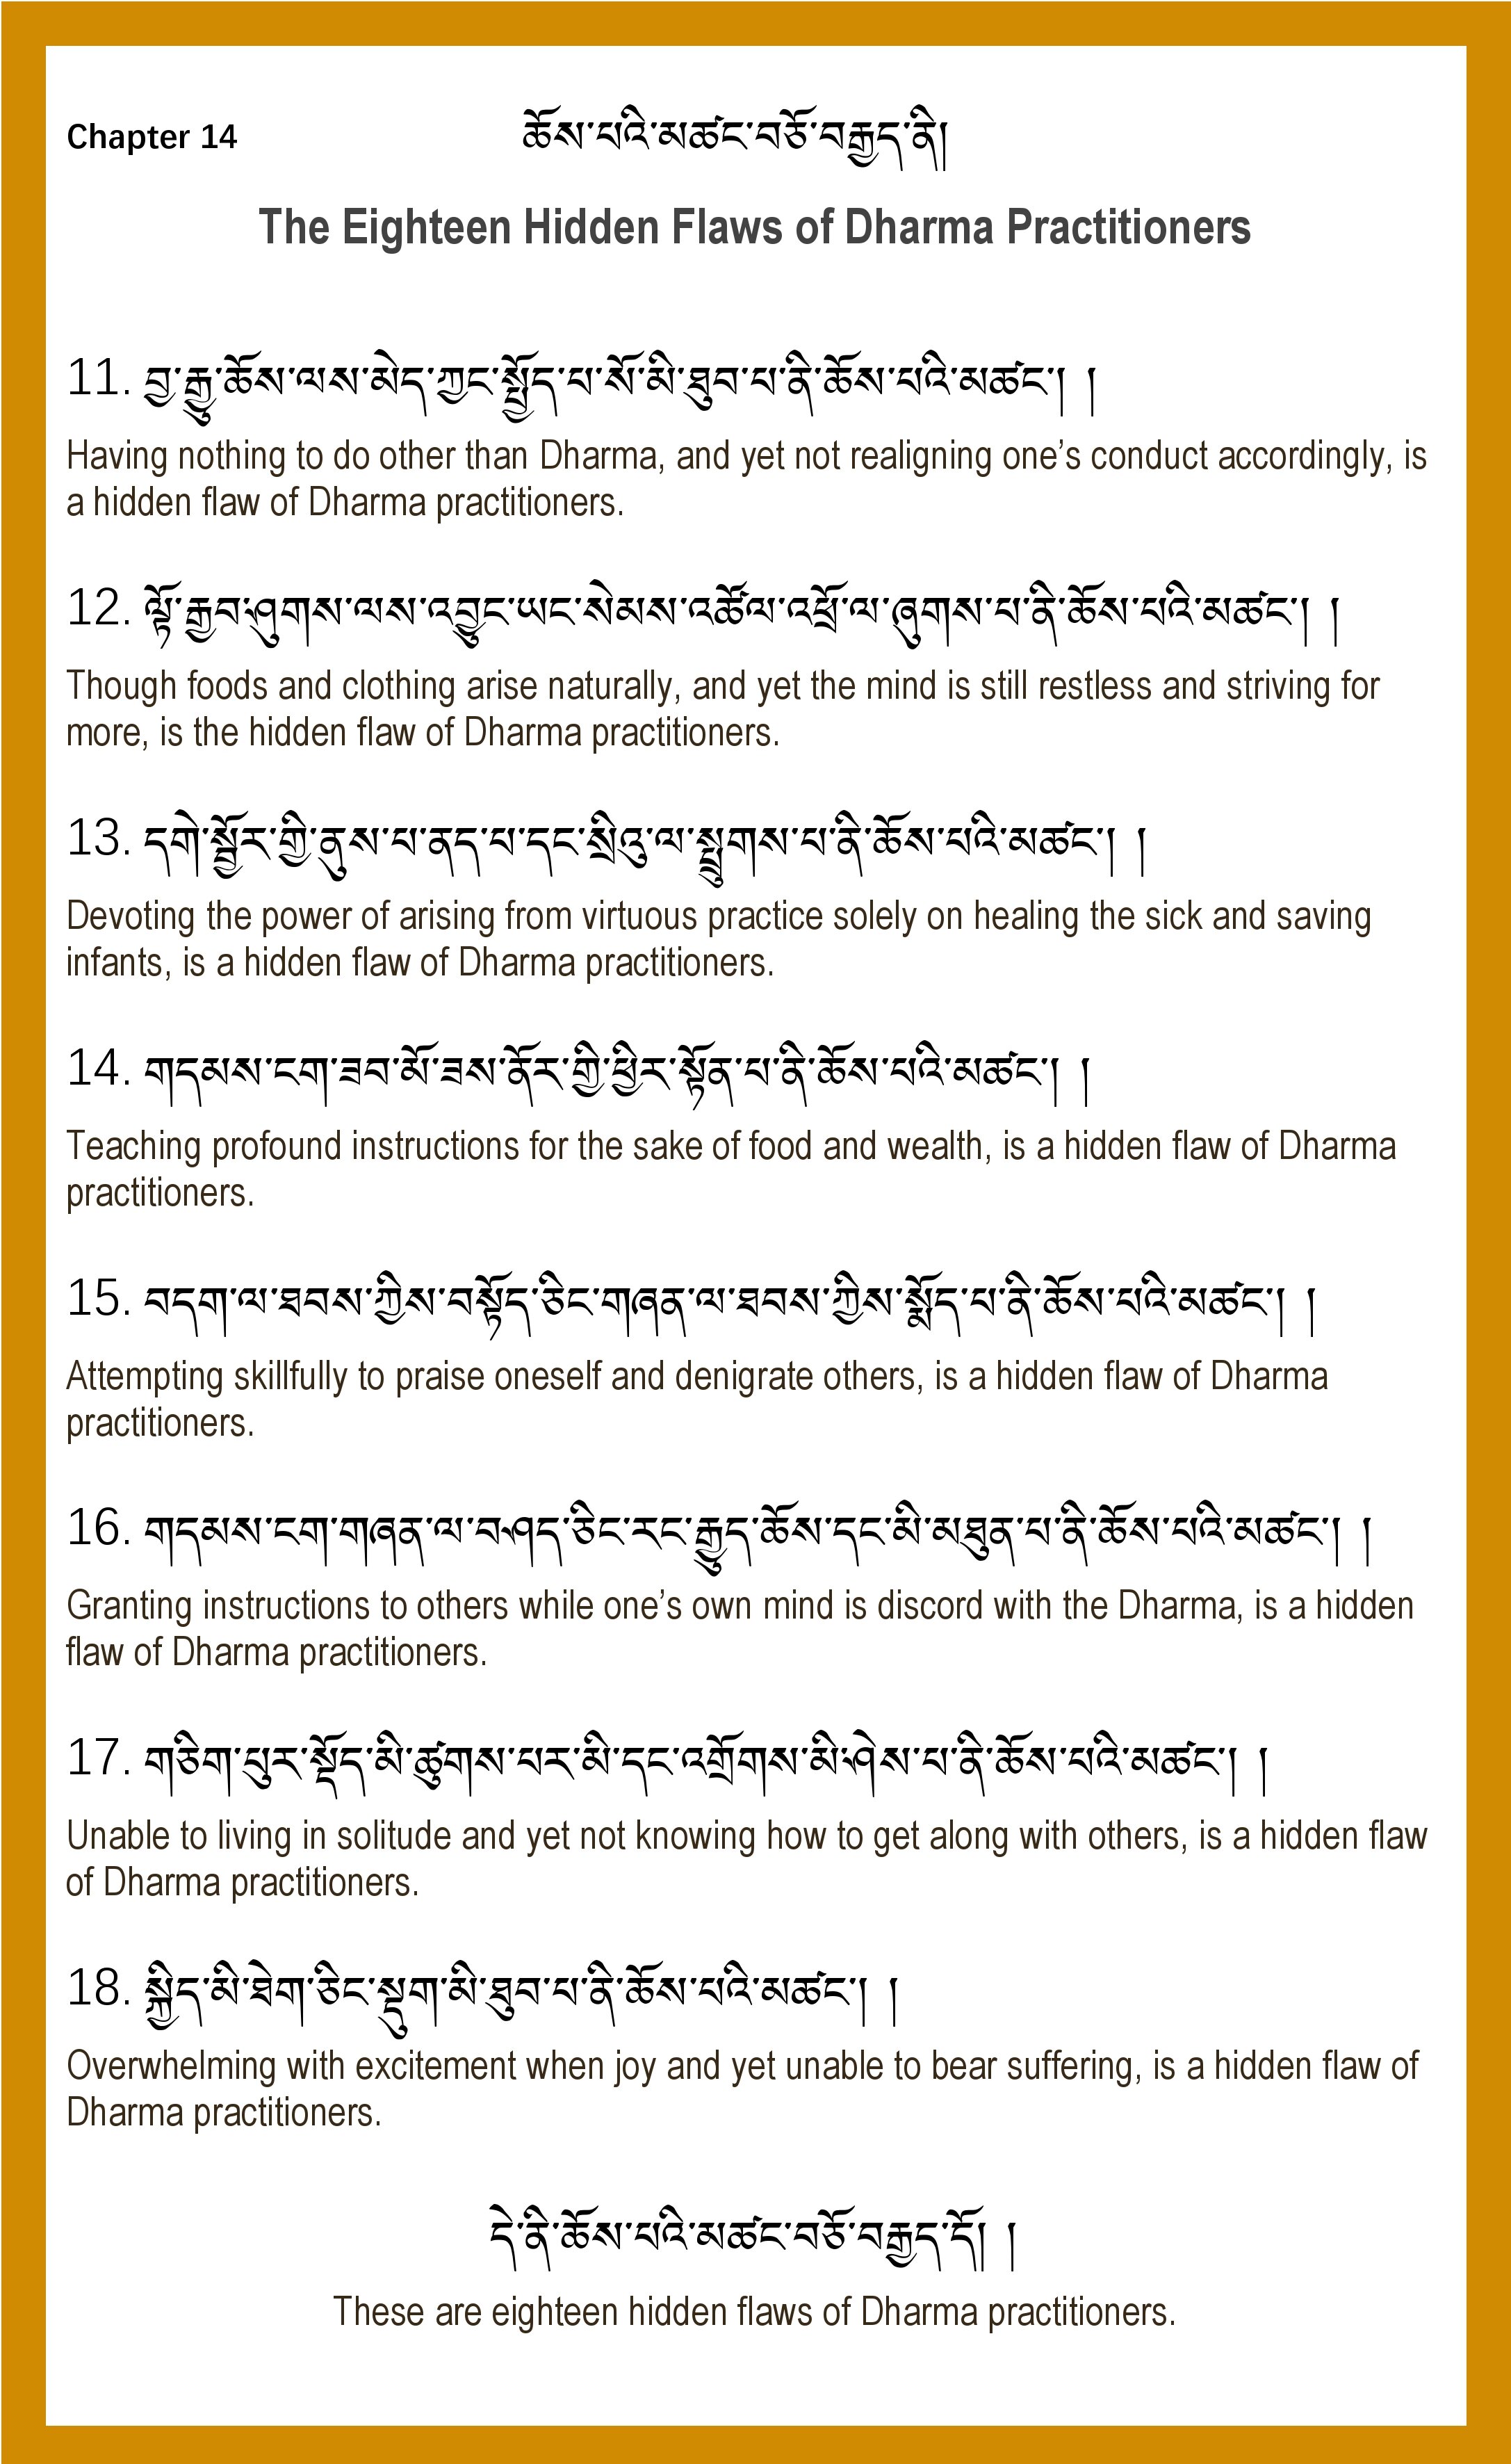 14-PGSP-The 18 Flaws of Dharma Practitioners0004.jpg